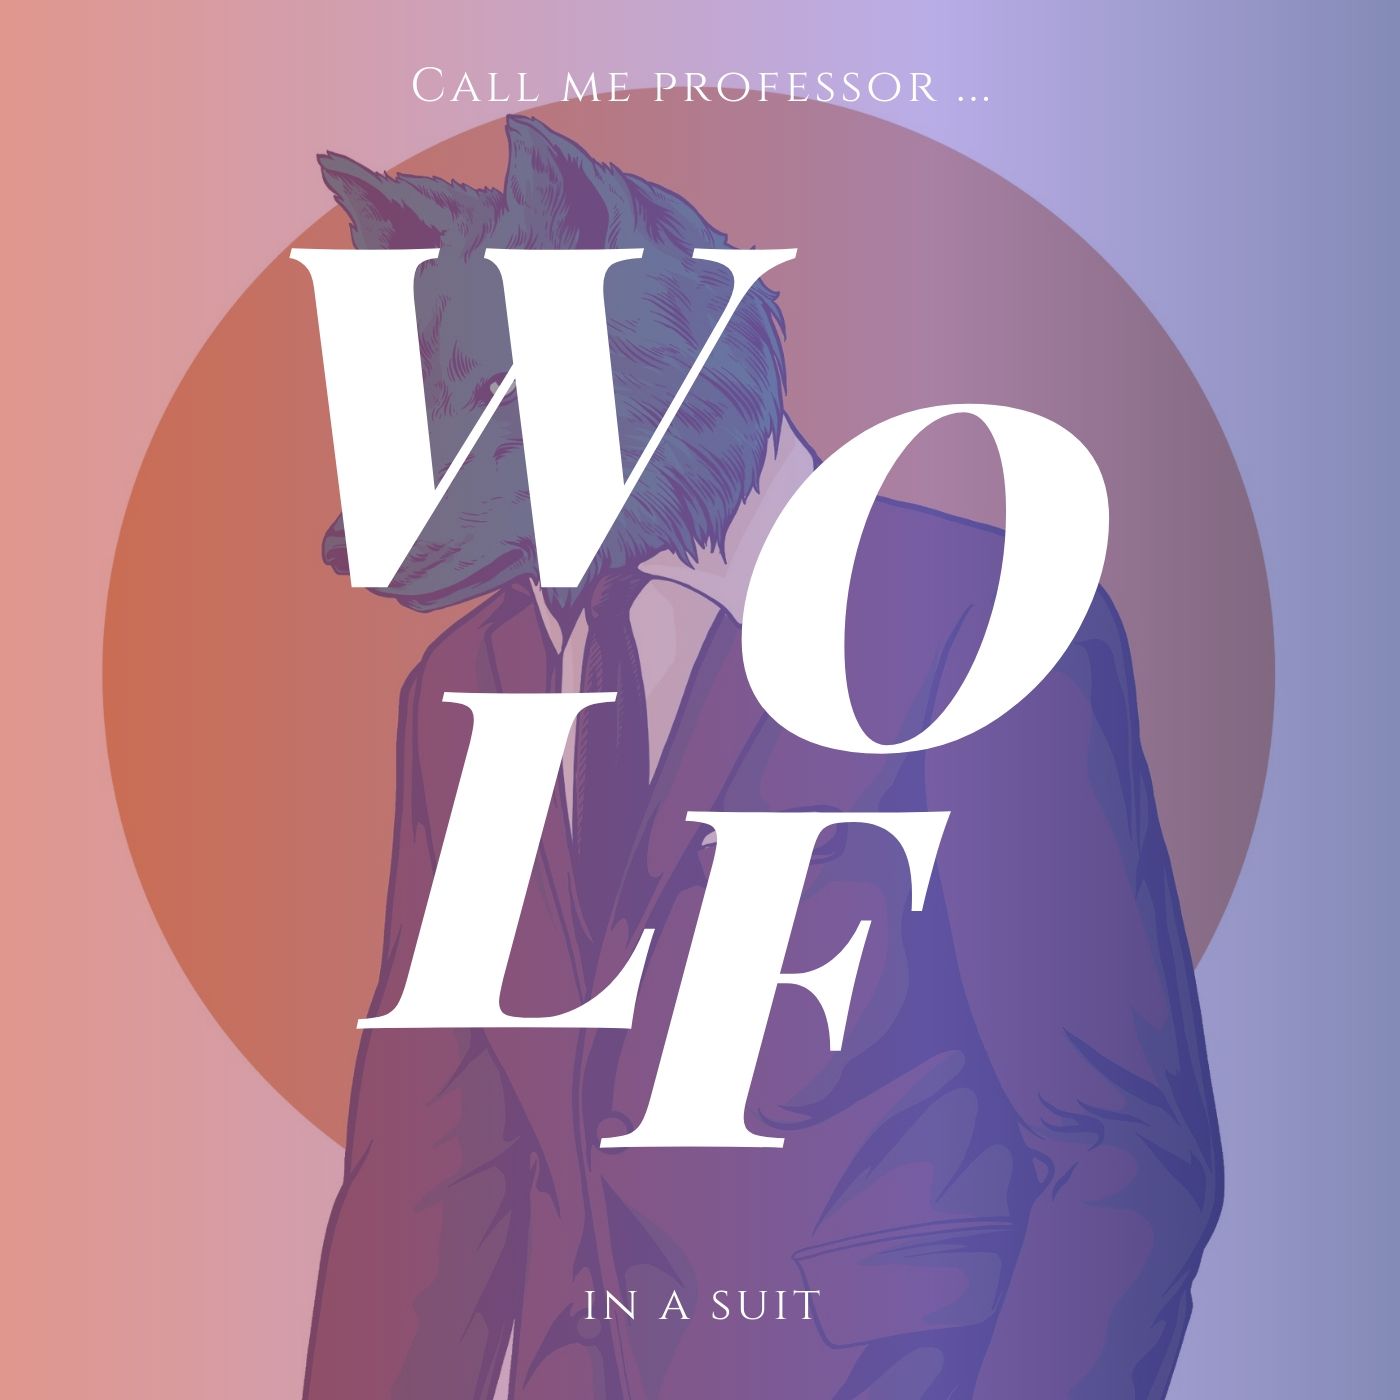 call me professor wolf in a suit - indie music - new music - indie pop - indie rock - indie folk - music blog - wolf in a suit - wolfinasuit - wolf in a suit blog